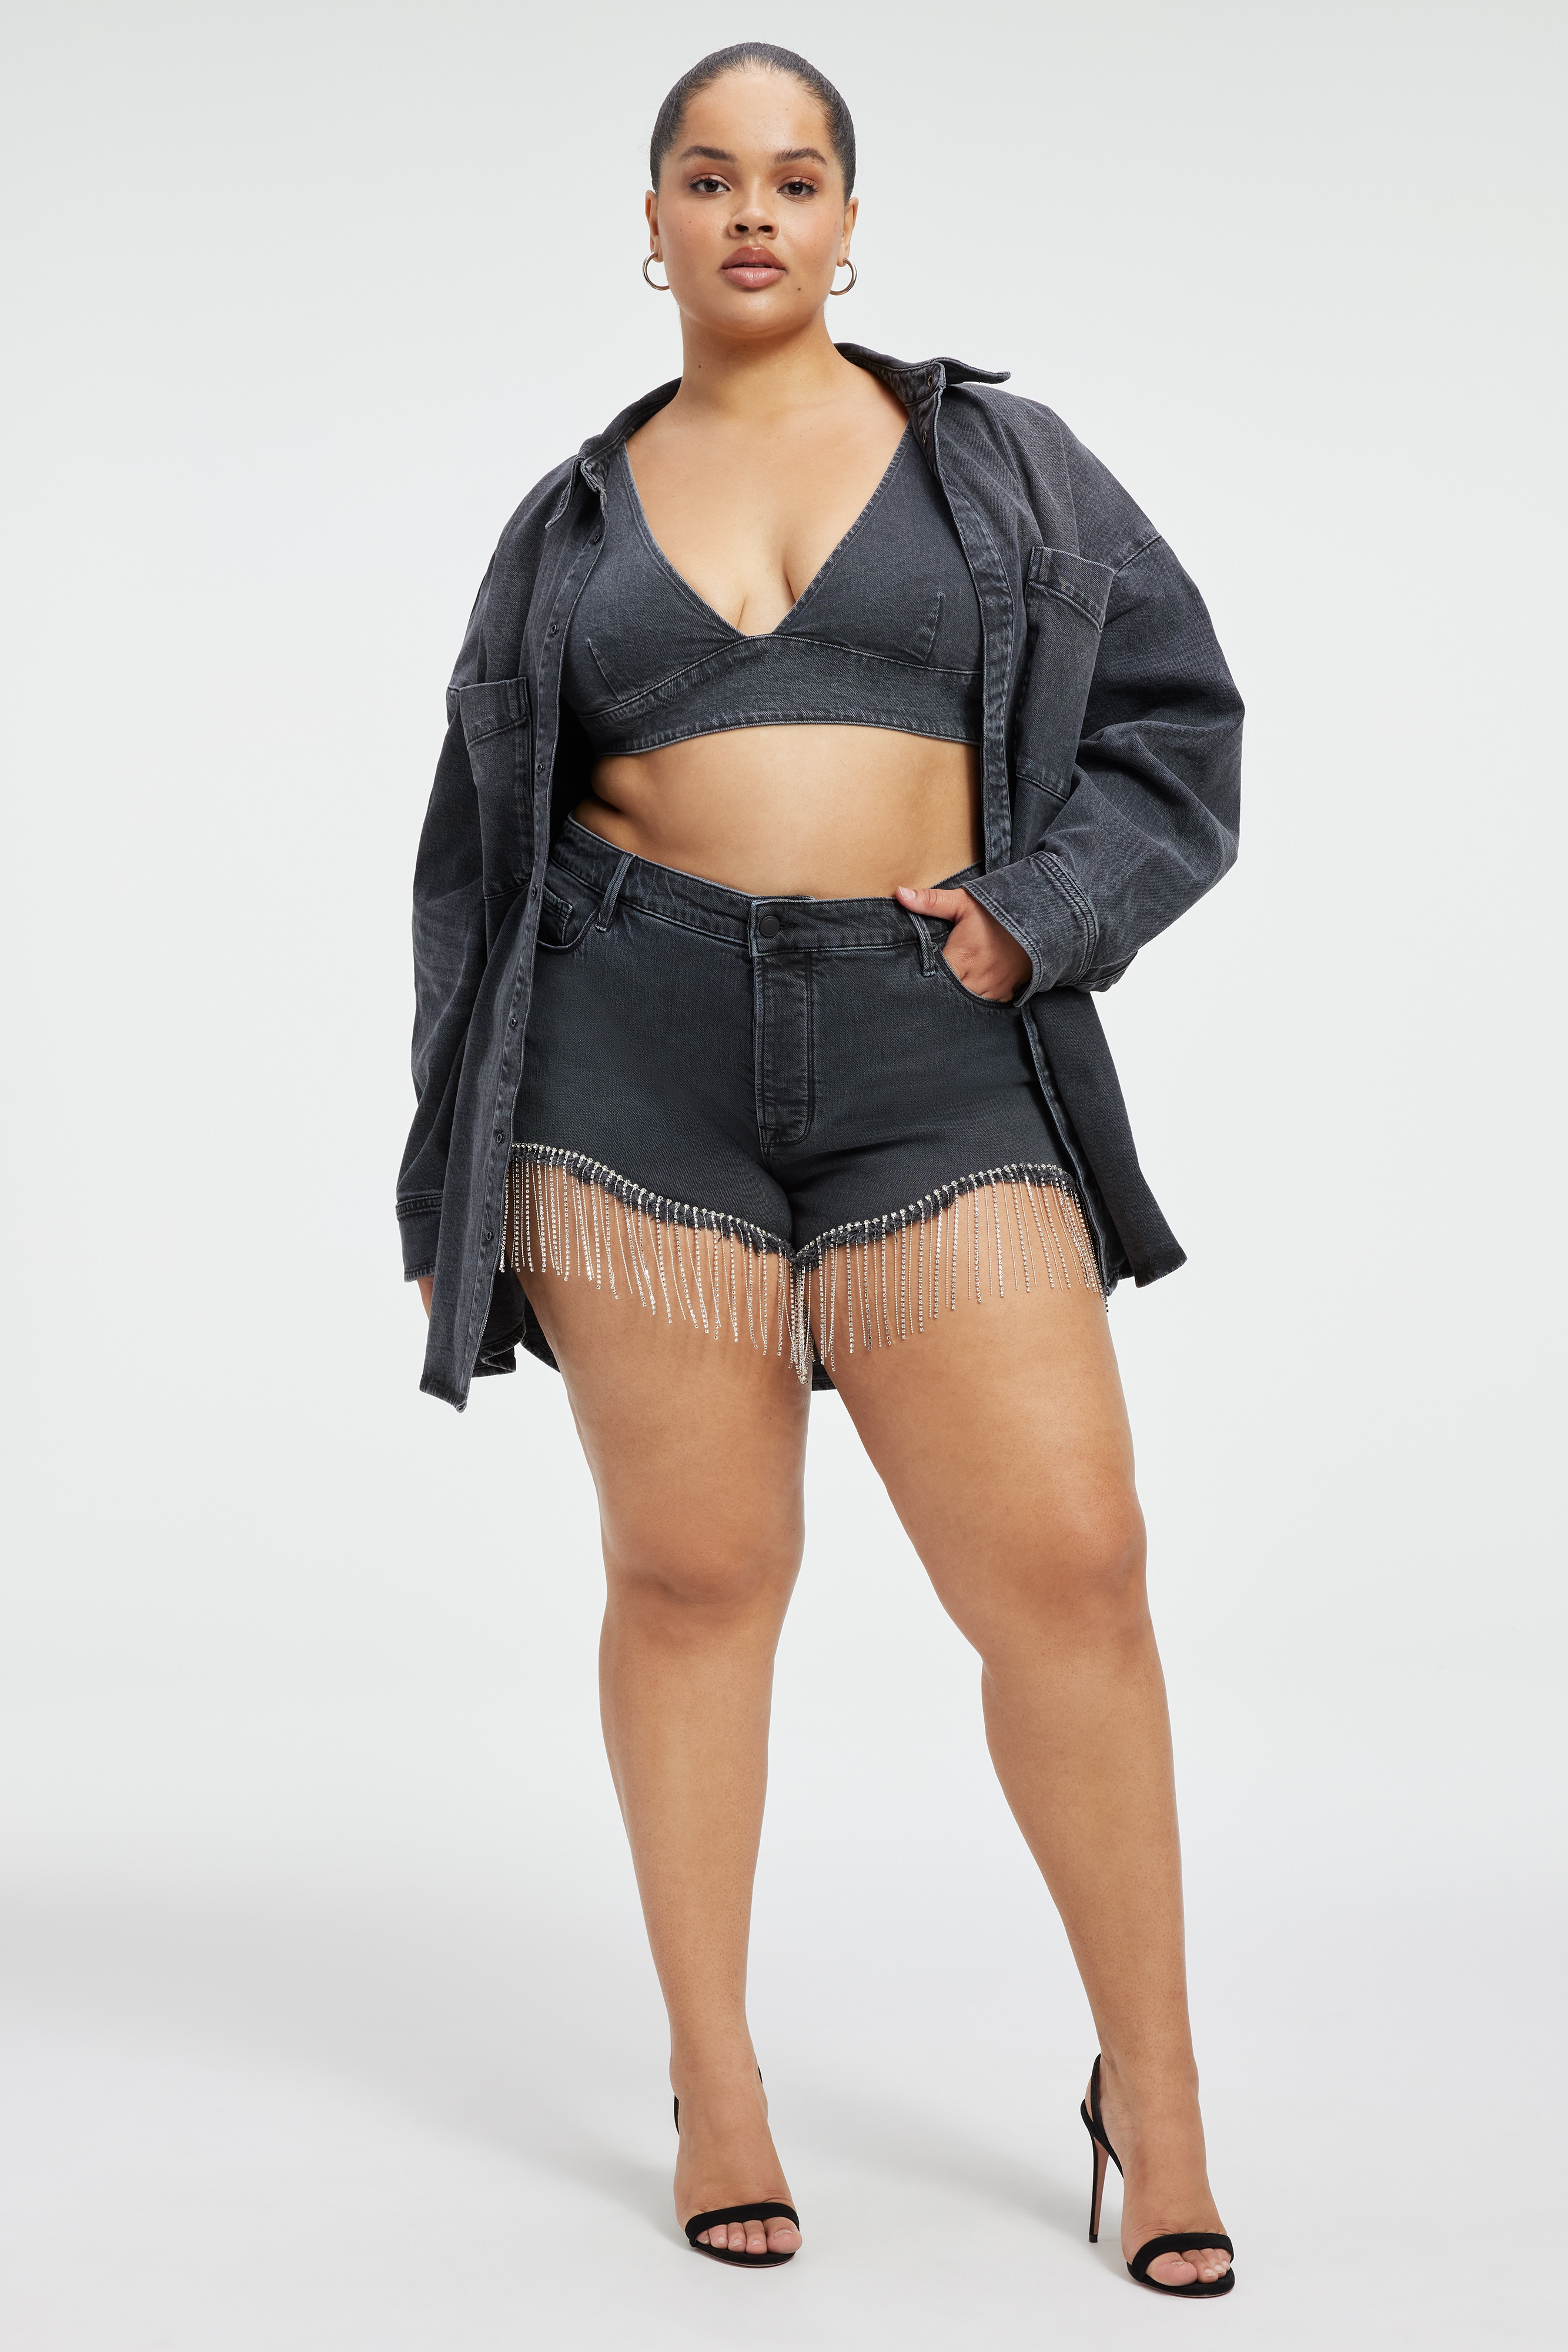 24 Plus-Size Denim Shorts That Look and Feel Amazing